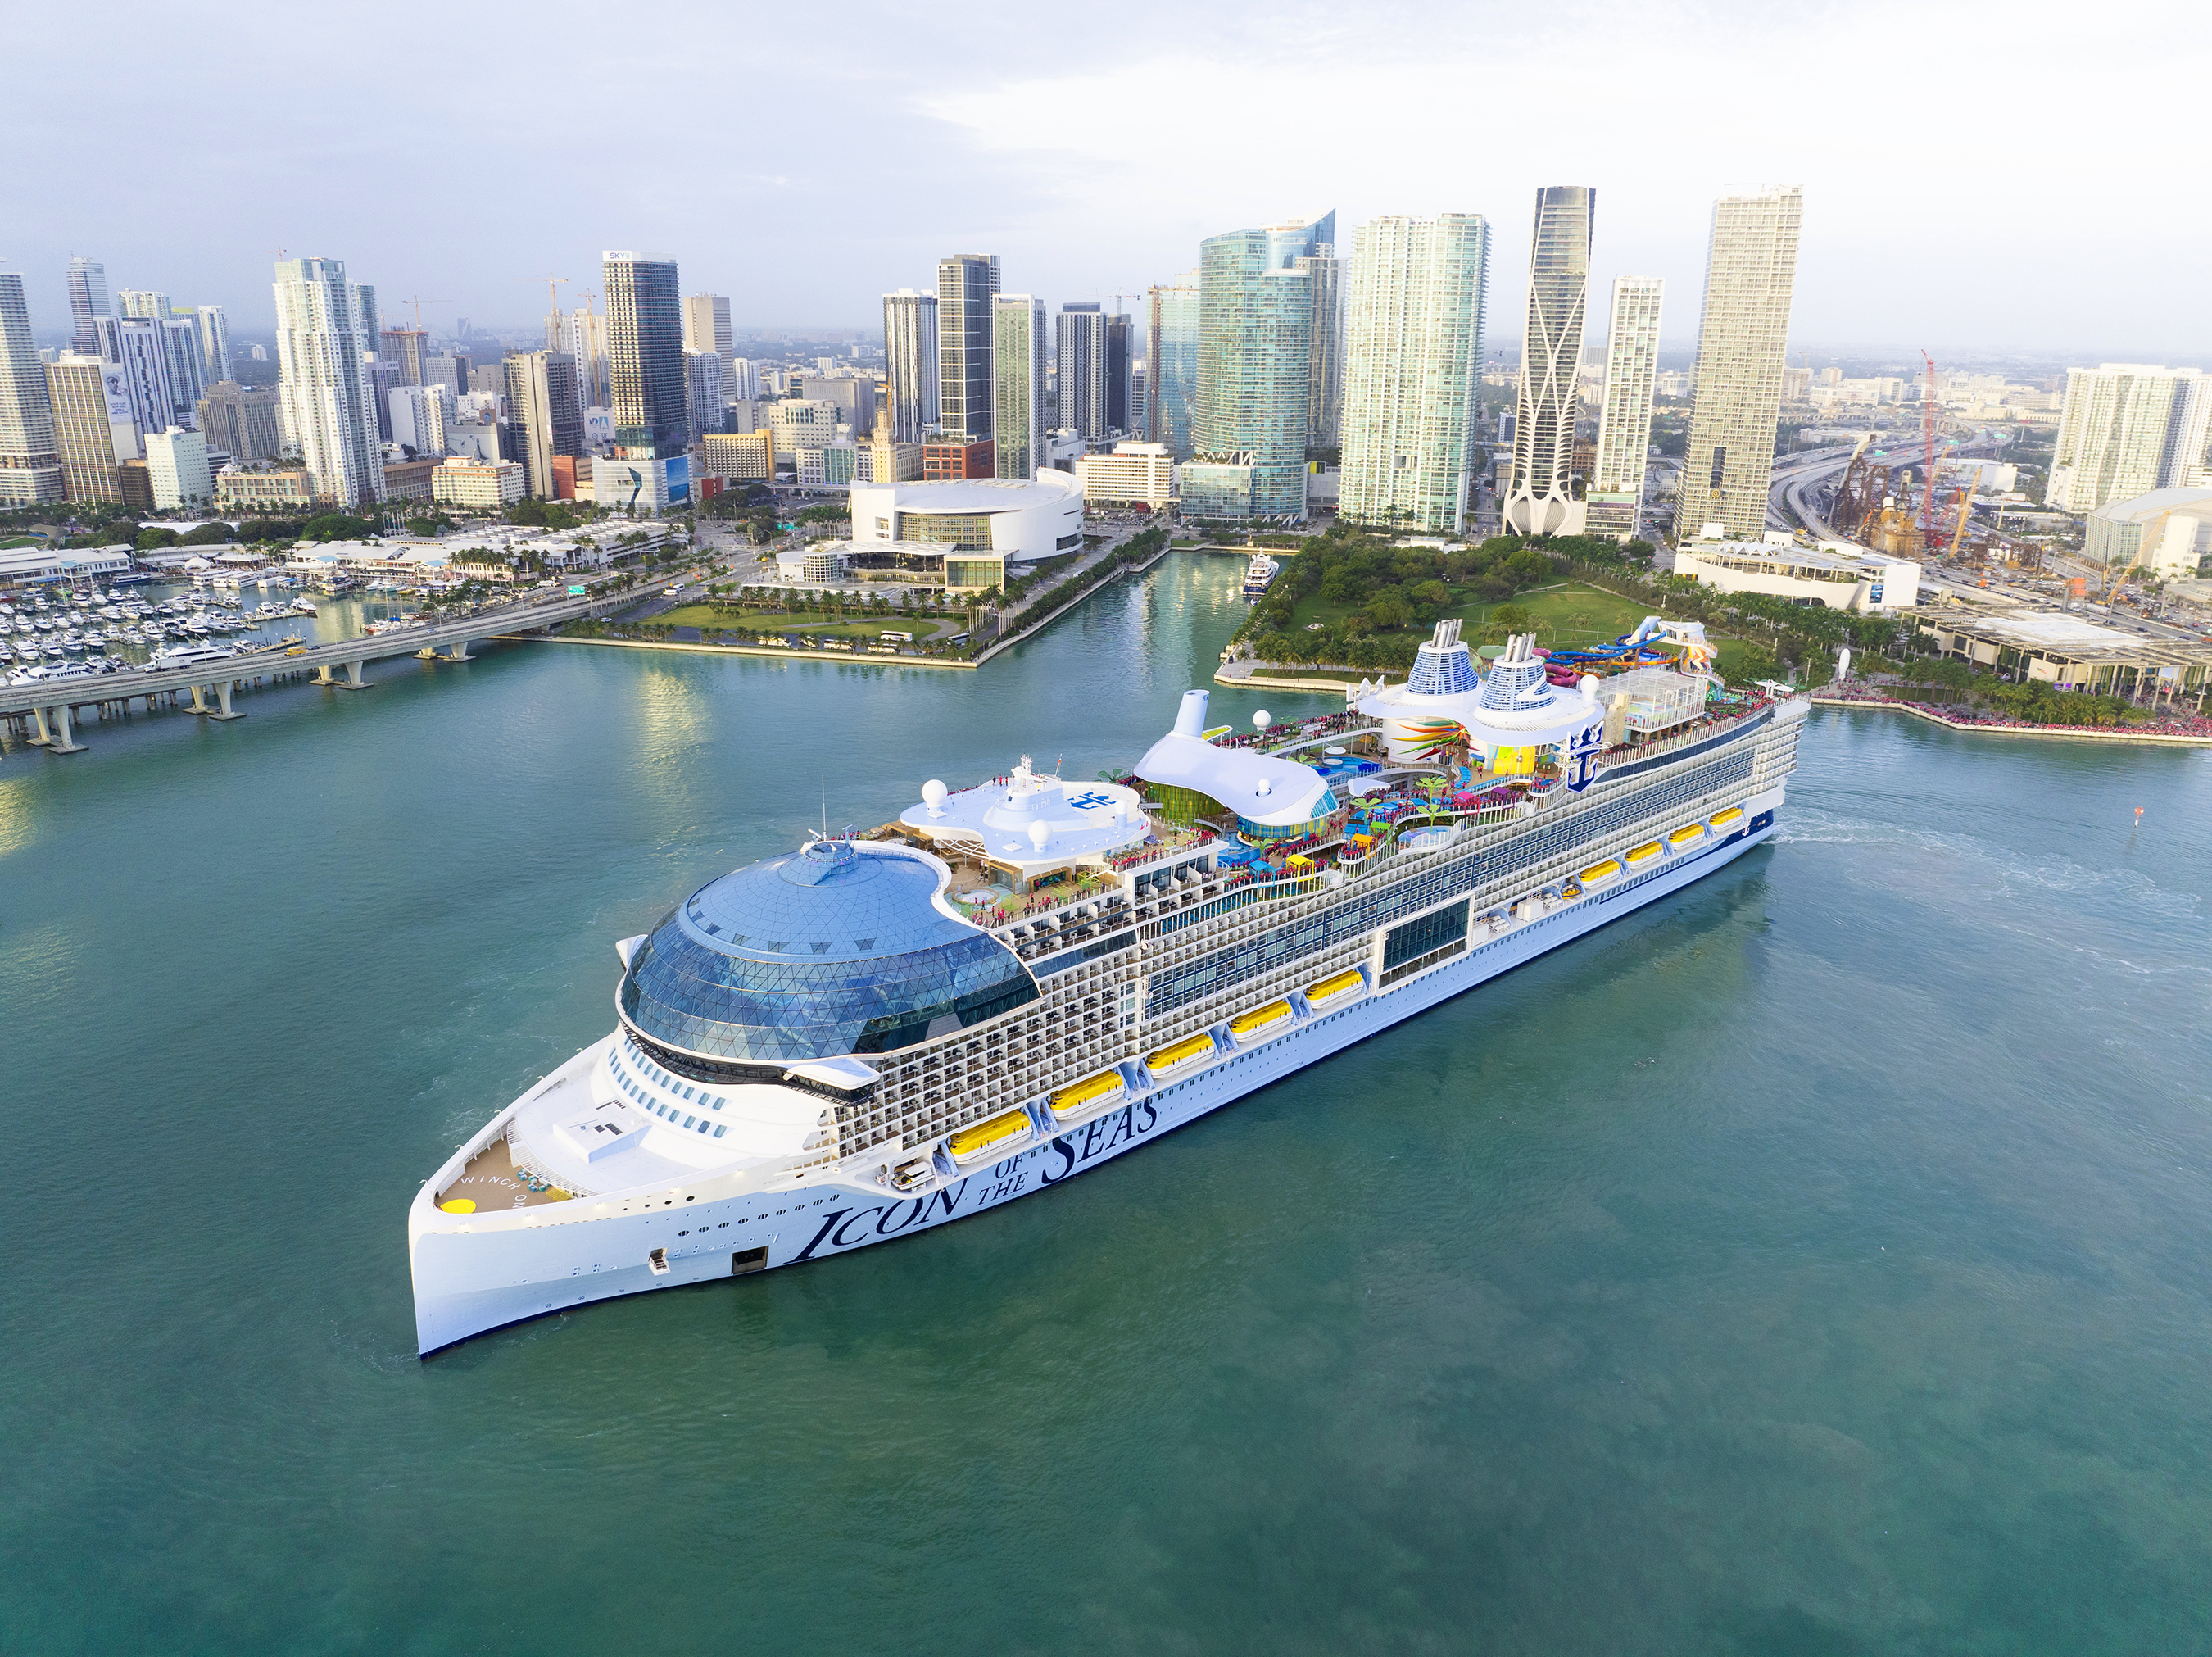 The Icon of the Seas cruise ship, made by Royal Caribbean, in Miami Florida.